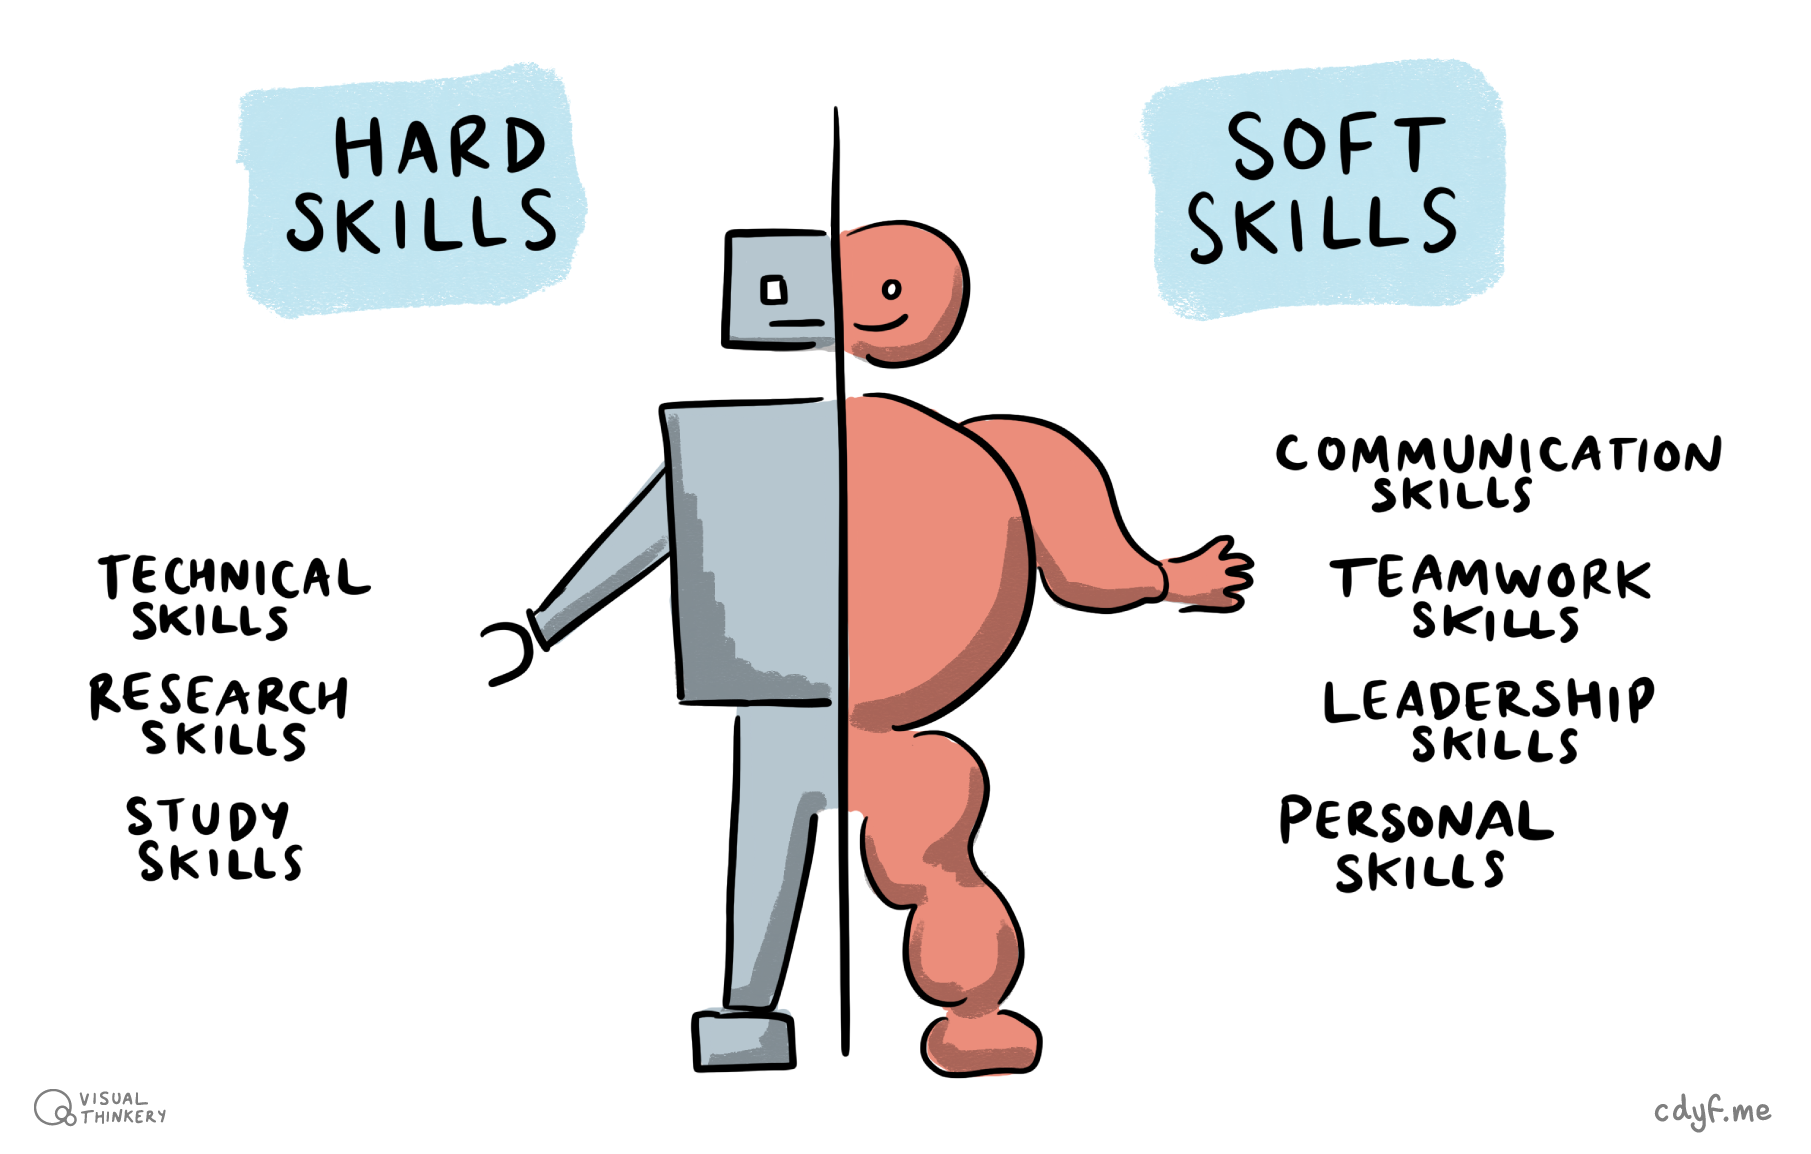 Hard skills and soft skills aren’t much use without each other. You will need both to survive and thrive but most science and engineering education focuses on your hard skills, not your soft skills. Why? Because hard skills are often much easier to measure. Hard and soft skills sketch by Visual Thinkery is licensed under CC-BY-ND